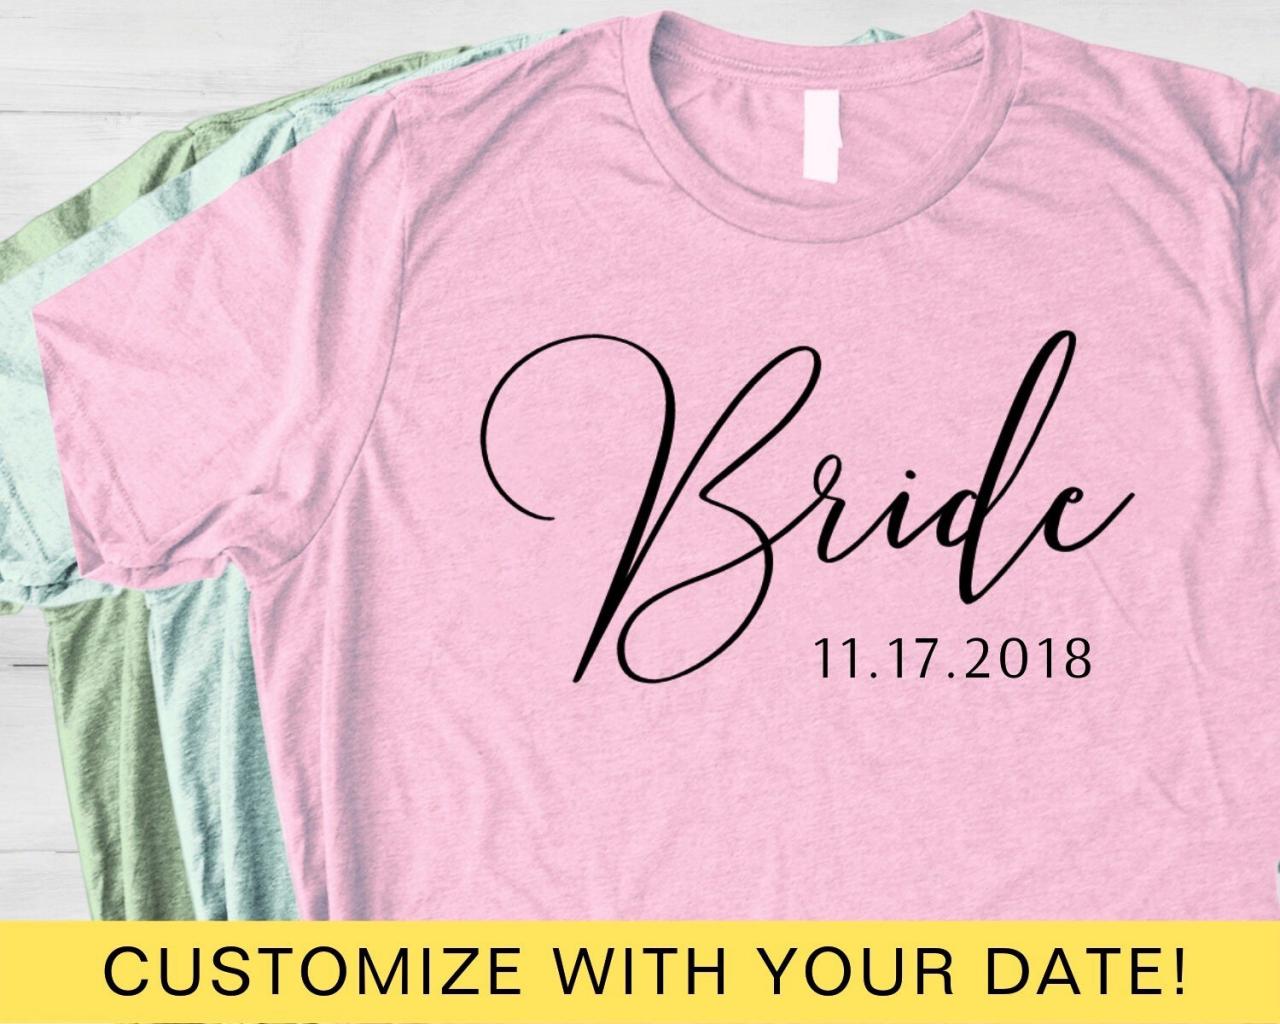 Personalized Bride Shirt, Custom Date, Newlyweds, Couples, Honeymoon, Just Married, Wedding Gift, Bridal Shower, Engagement, His And Hers